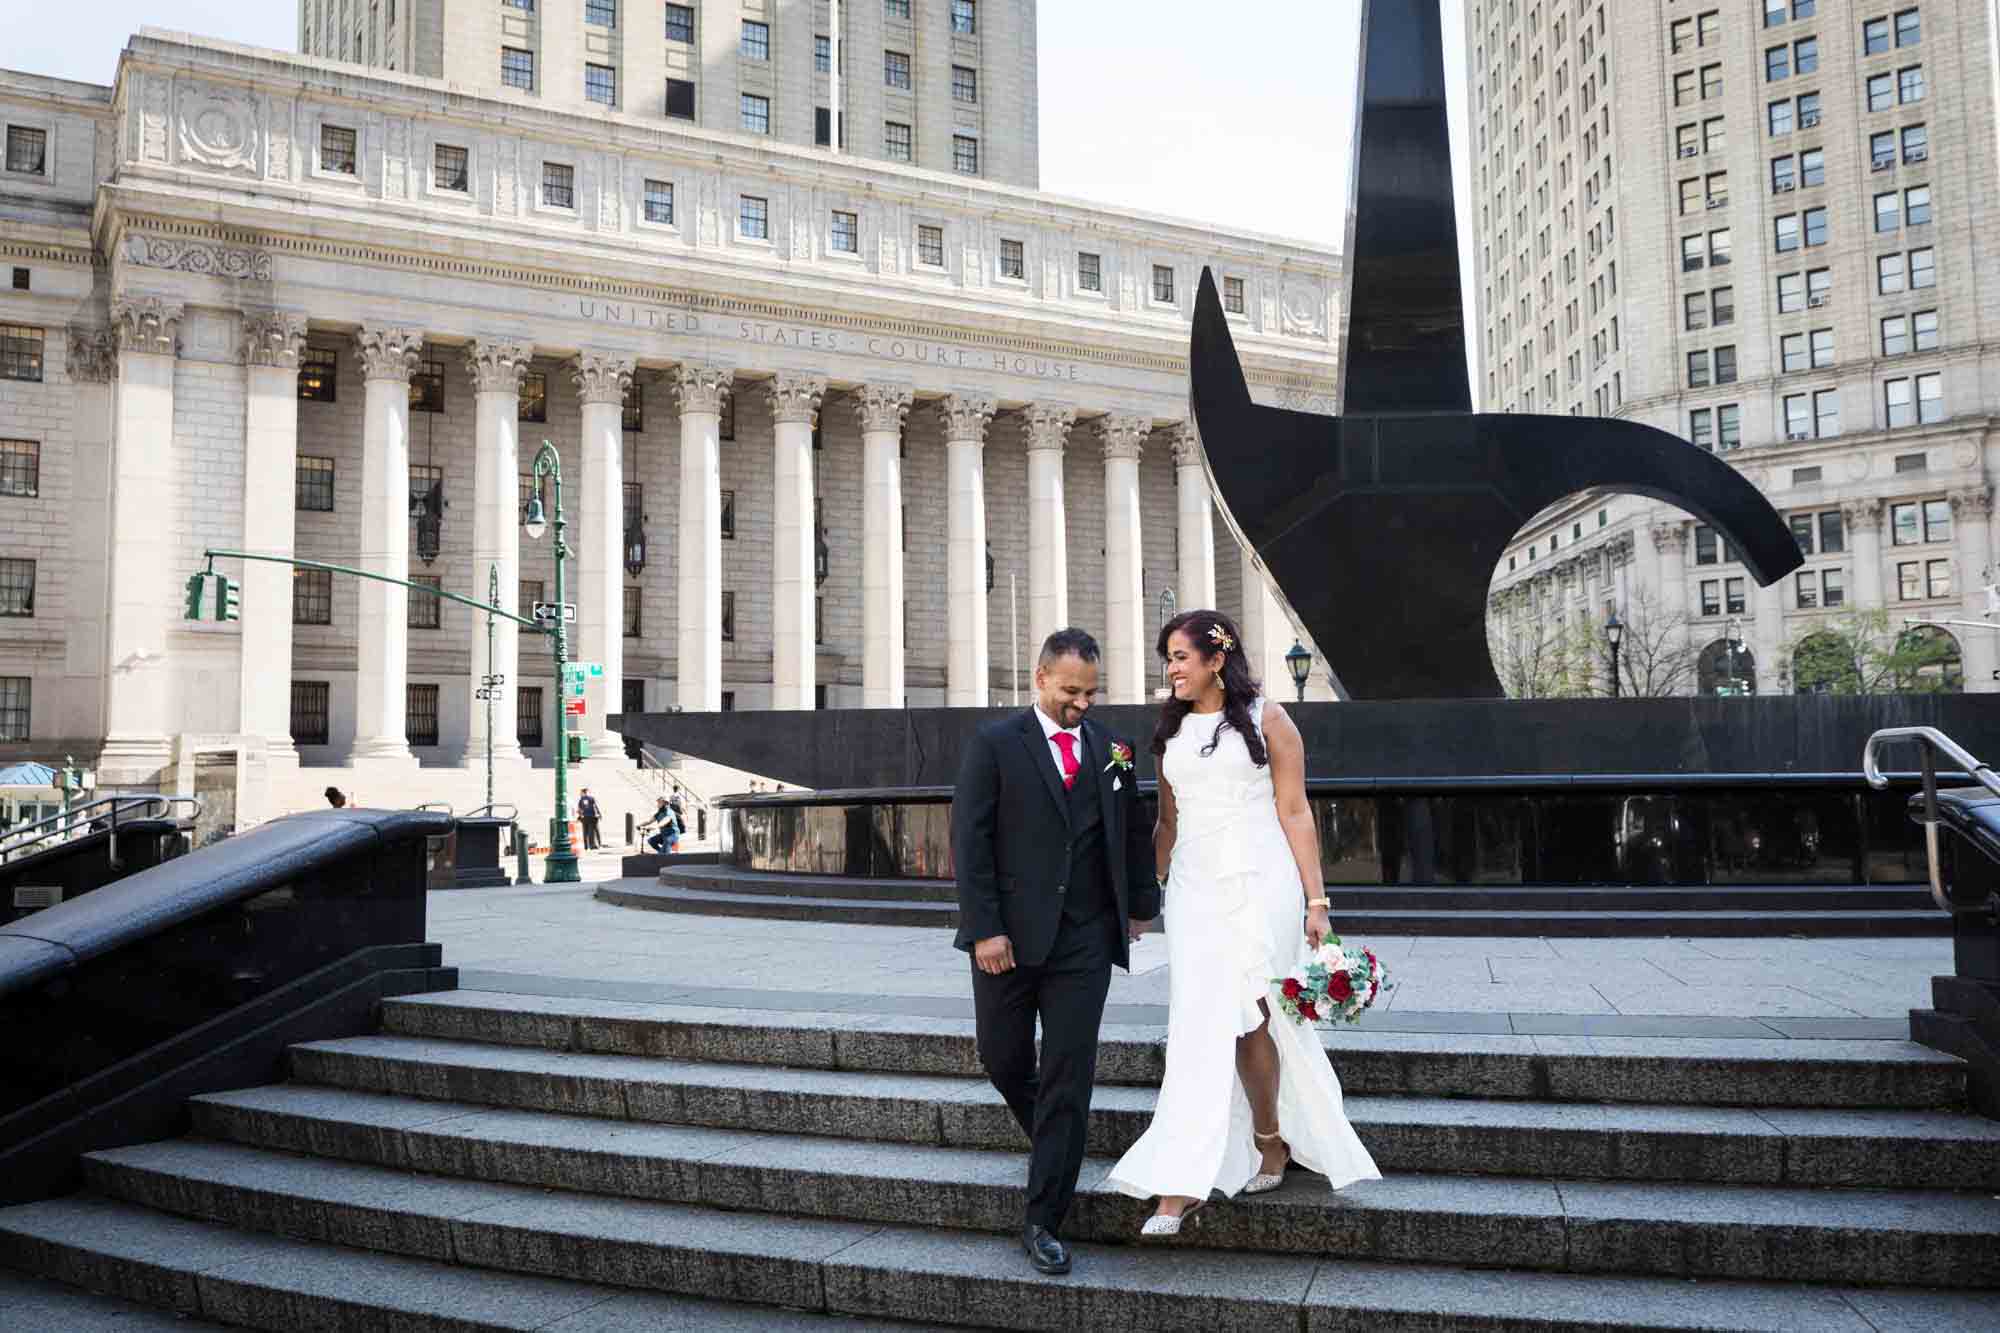 Bride and groom walking down steps in front of sword statue and large building with columns  at a NYC City Hall wedding